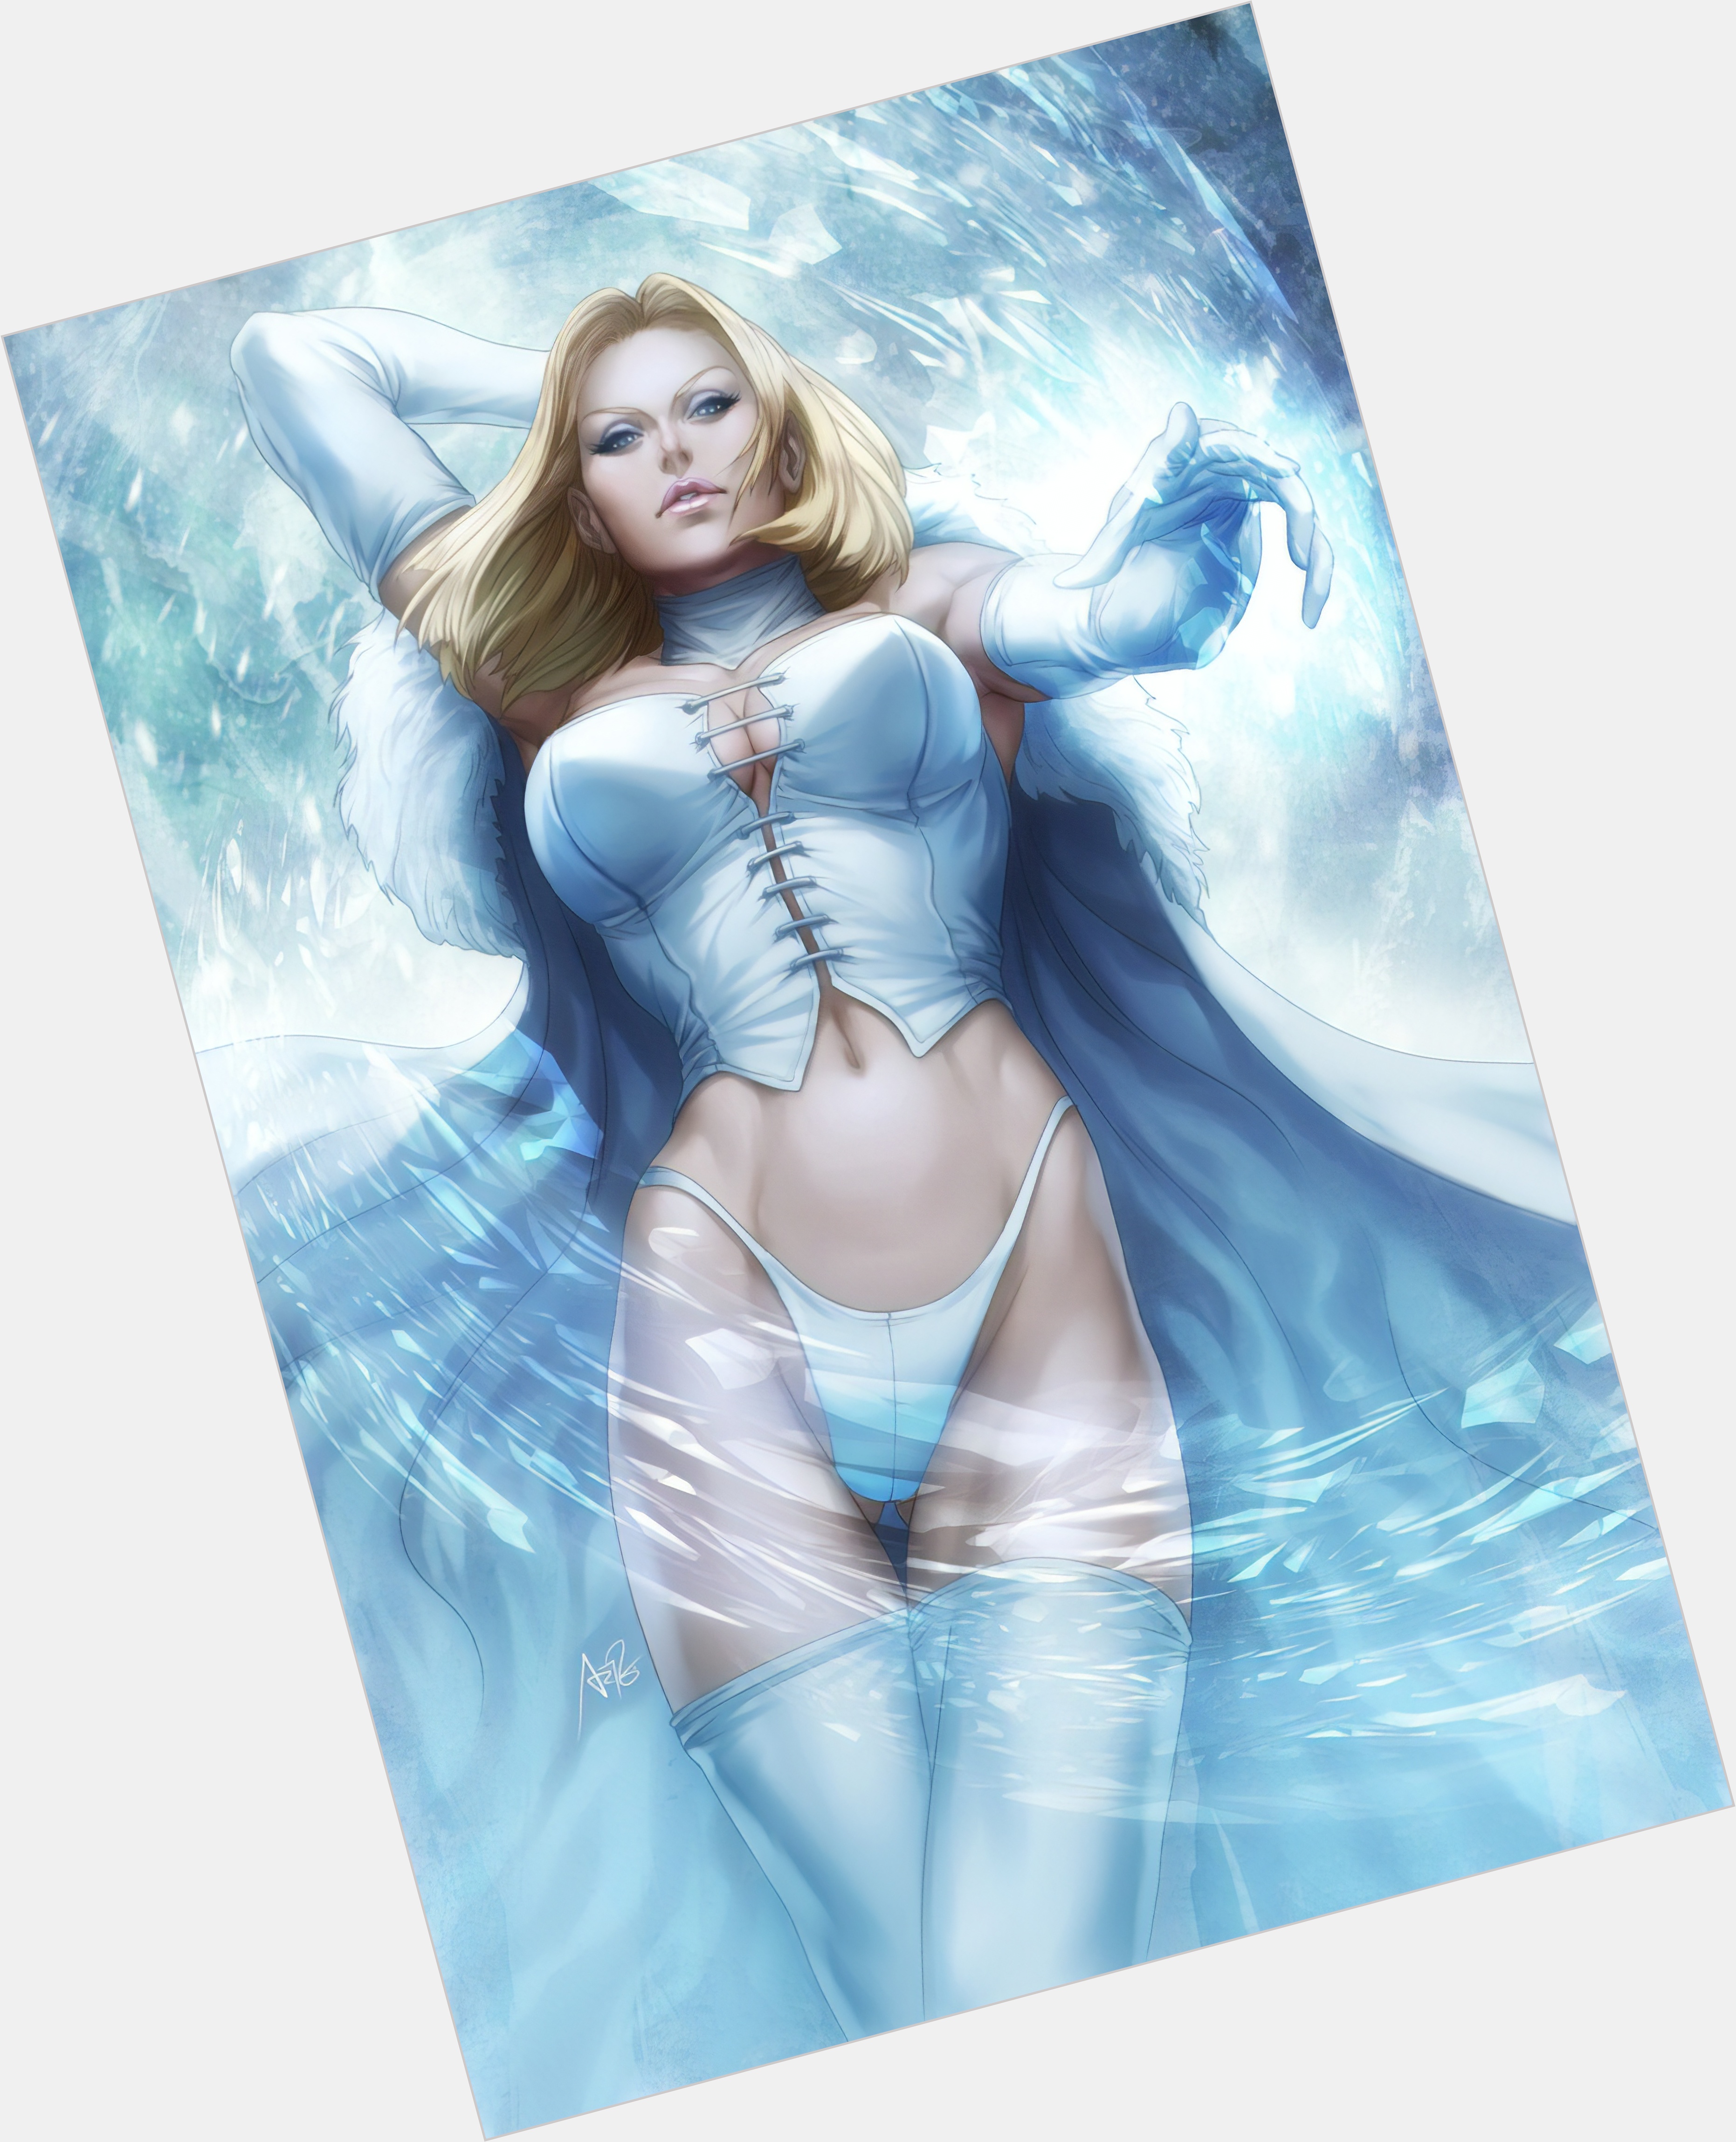 Emma Frost Athletic body,  blonde hair & hairstyles